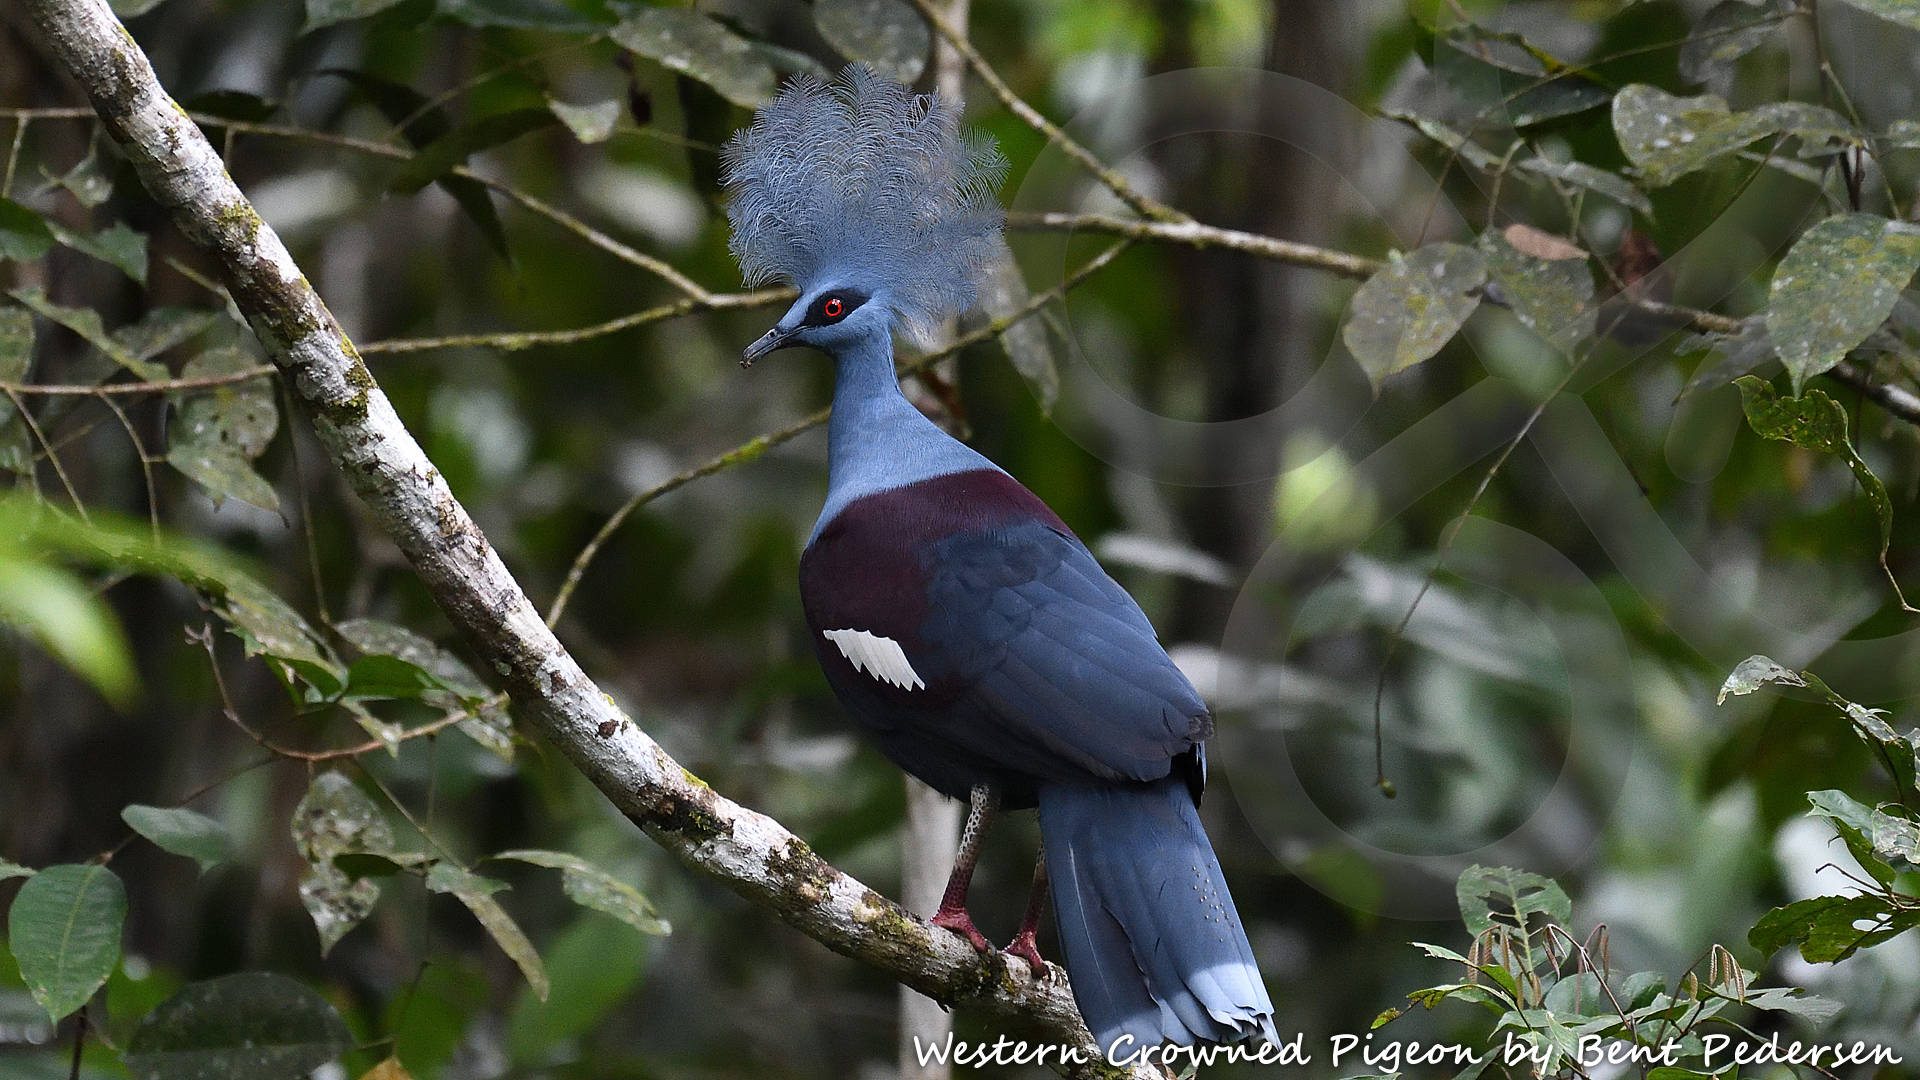 The majestic Western Crowned Pigeon Goura cristata is among 65 bird species that are endemic to West Papua and, except for an introduced population on the Moluccan island of Seram, occurs nowhere else on Earth. Copyright © Bent Pedersen